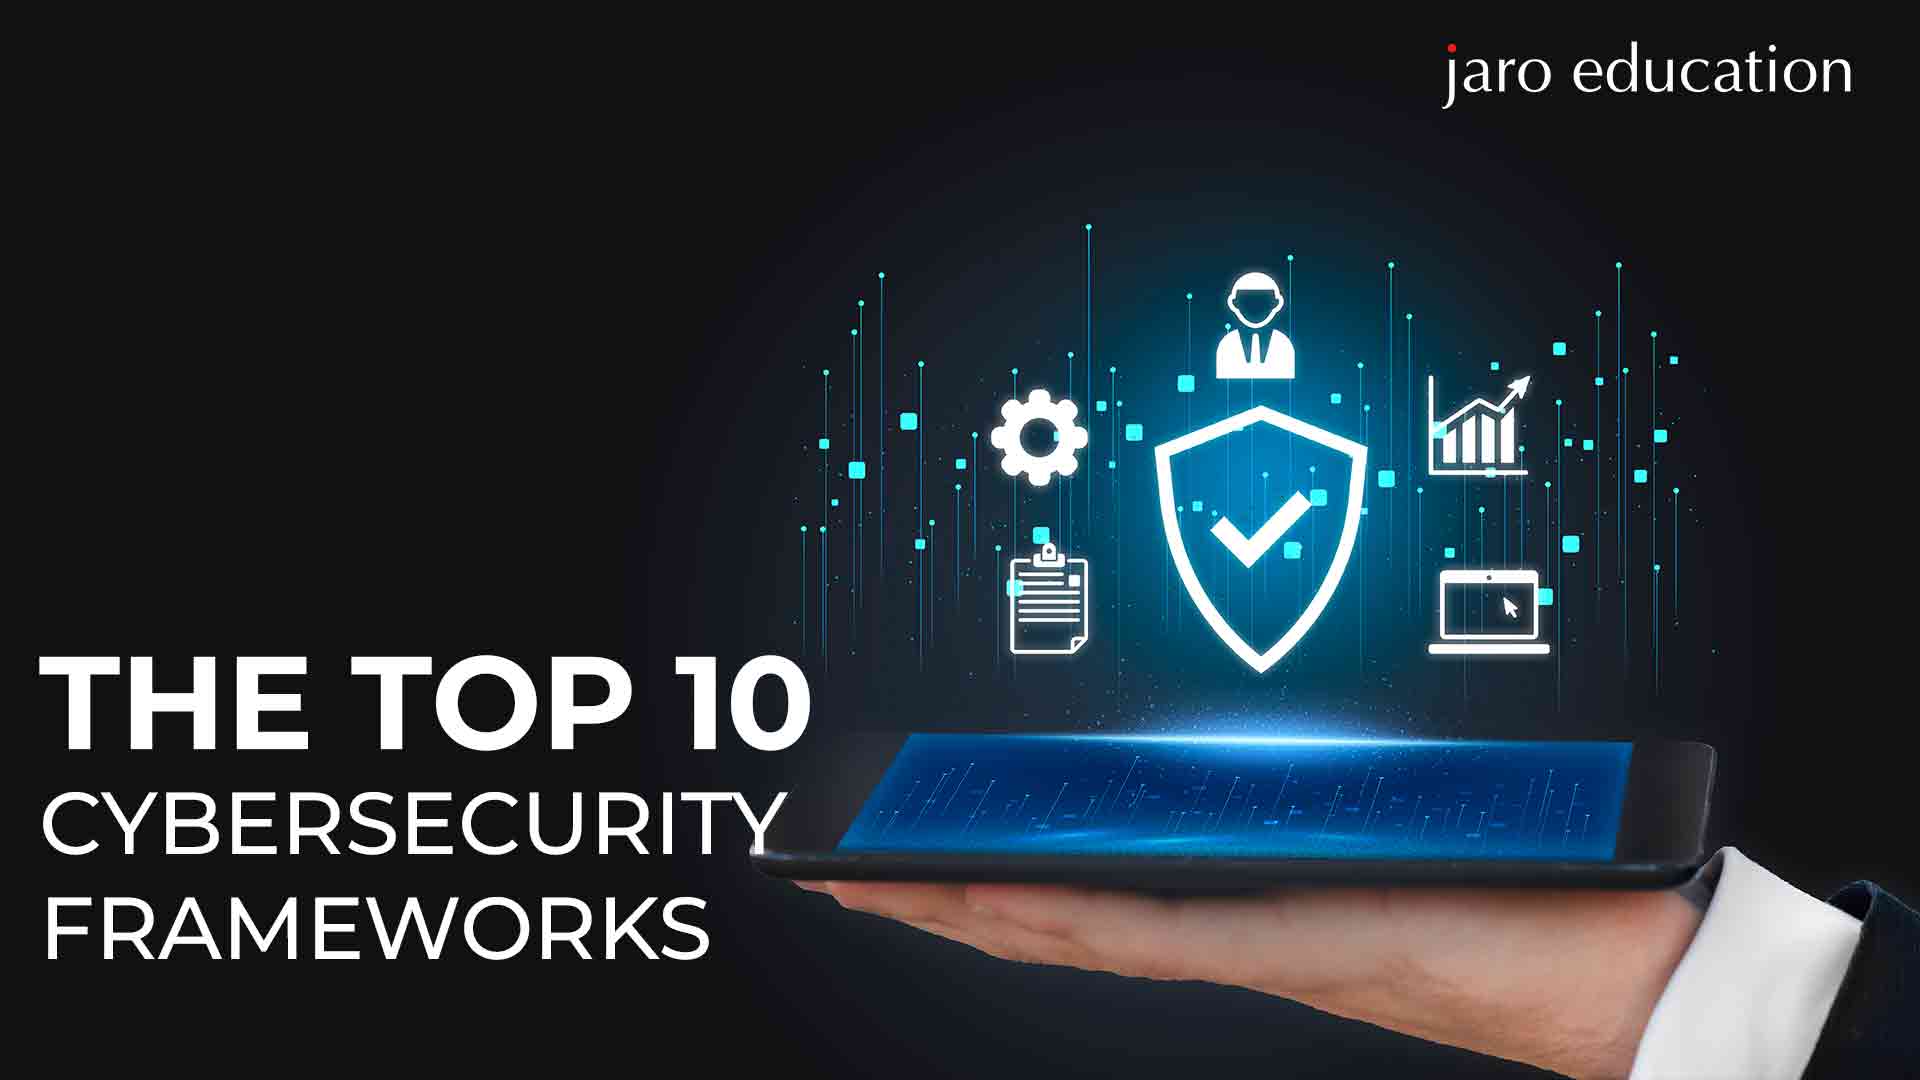 The Top 10 Cybersecurity Frameworks